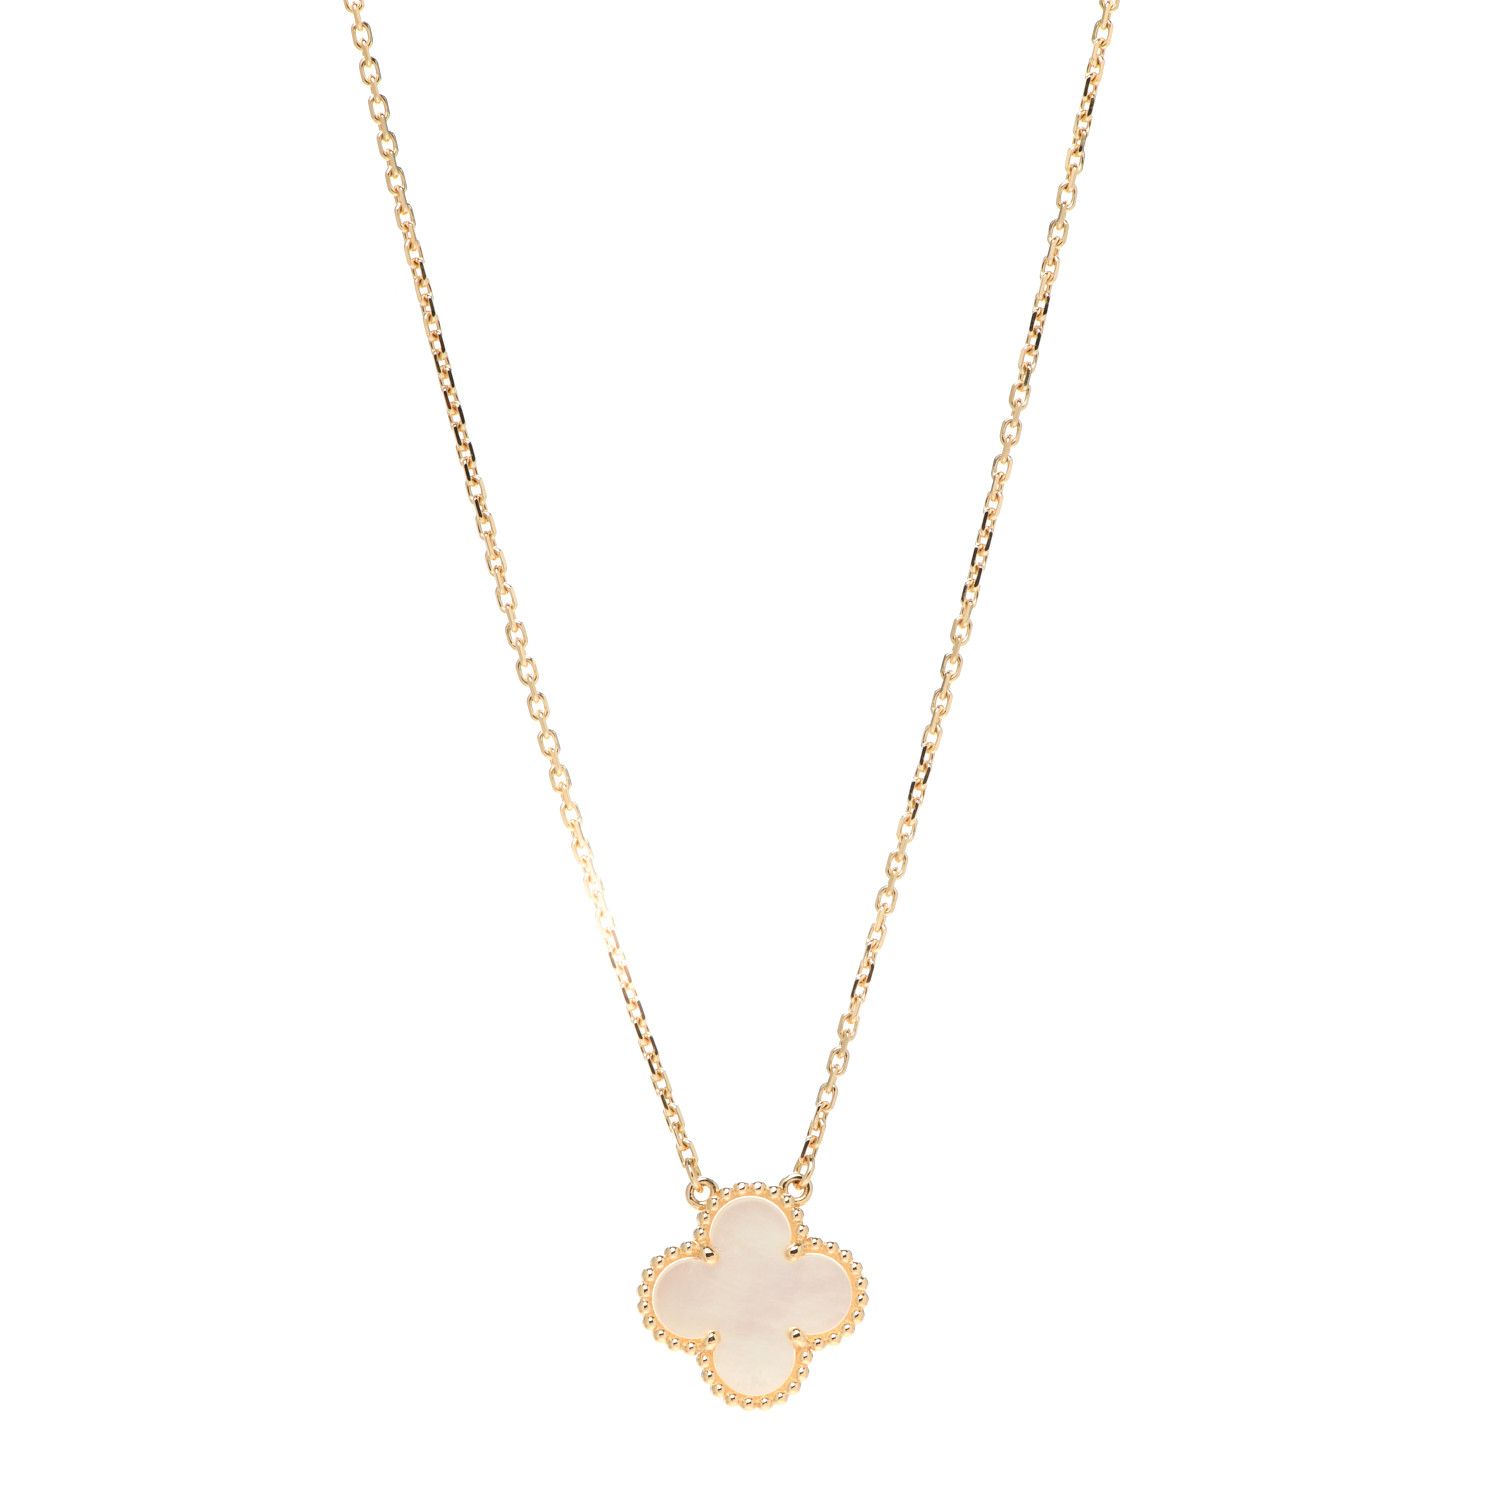 VAN CLEEF & ARPELS

18K Yellow Gold Mother of Pearl Vintage Alhambra Pendant Necklace | Fashionphile